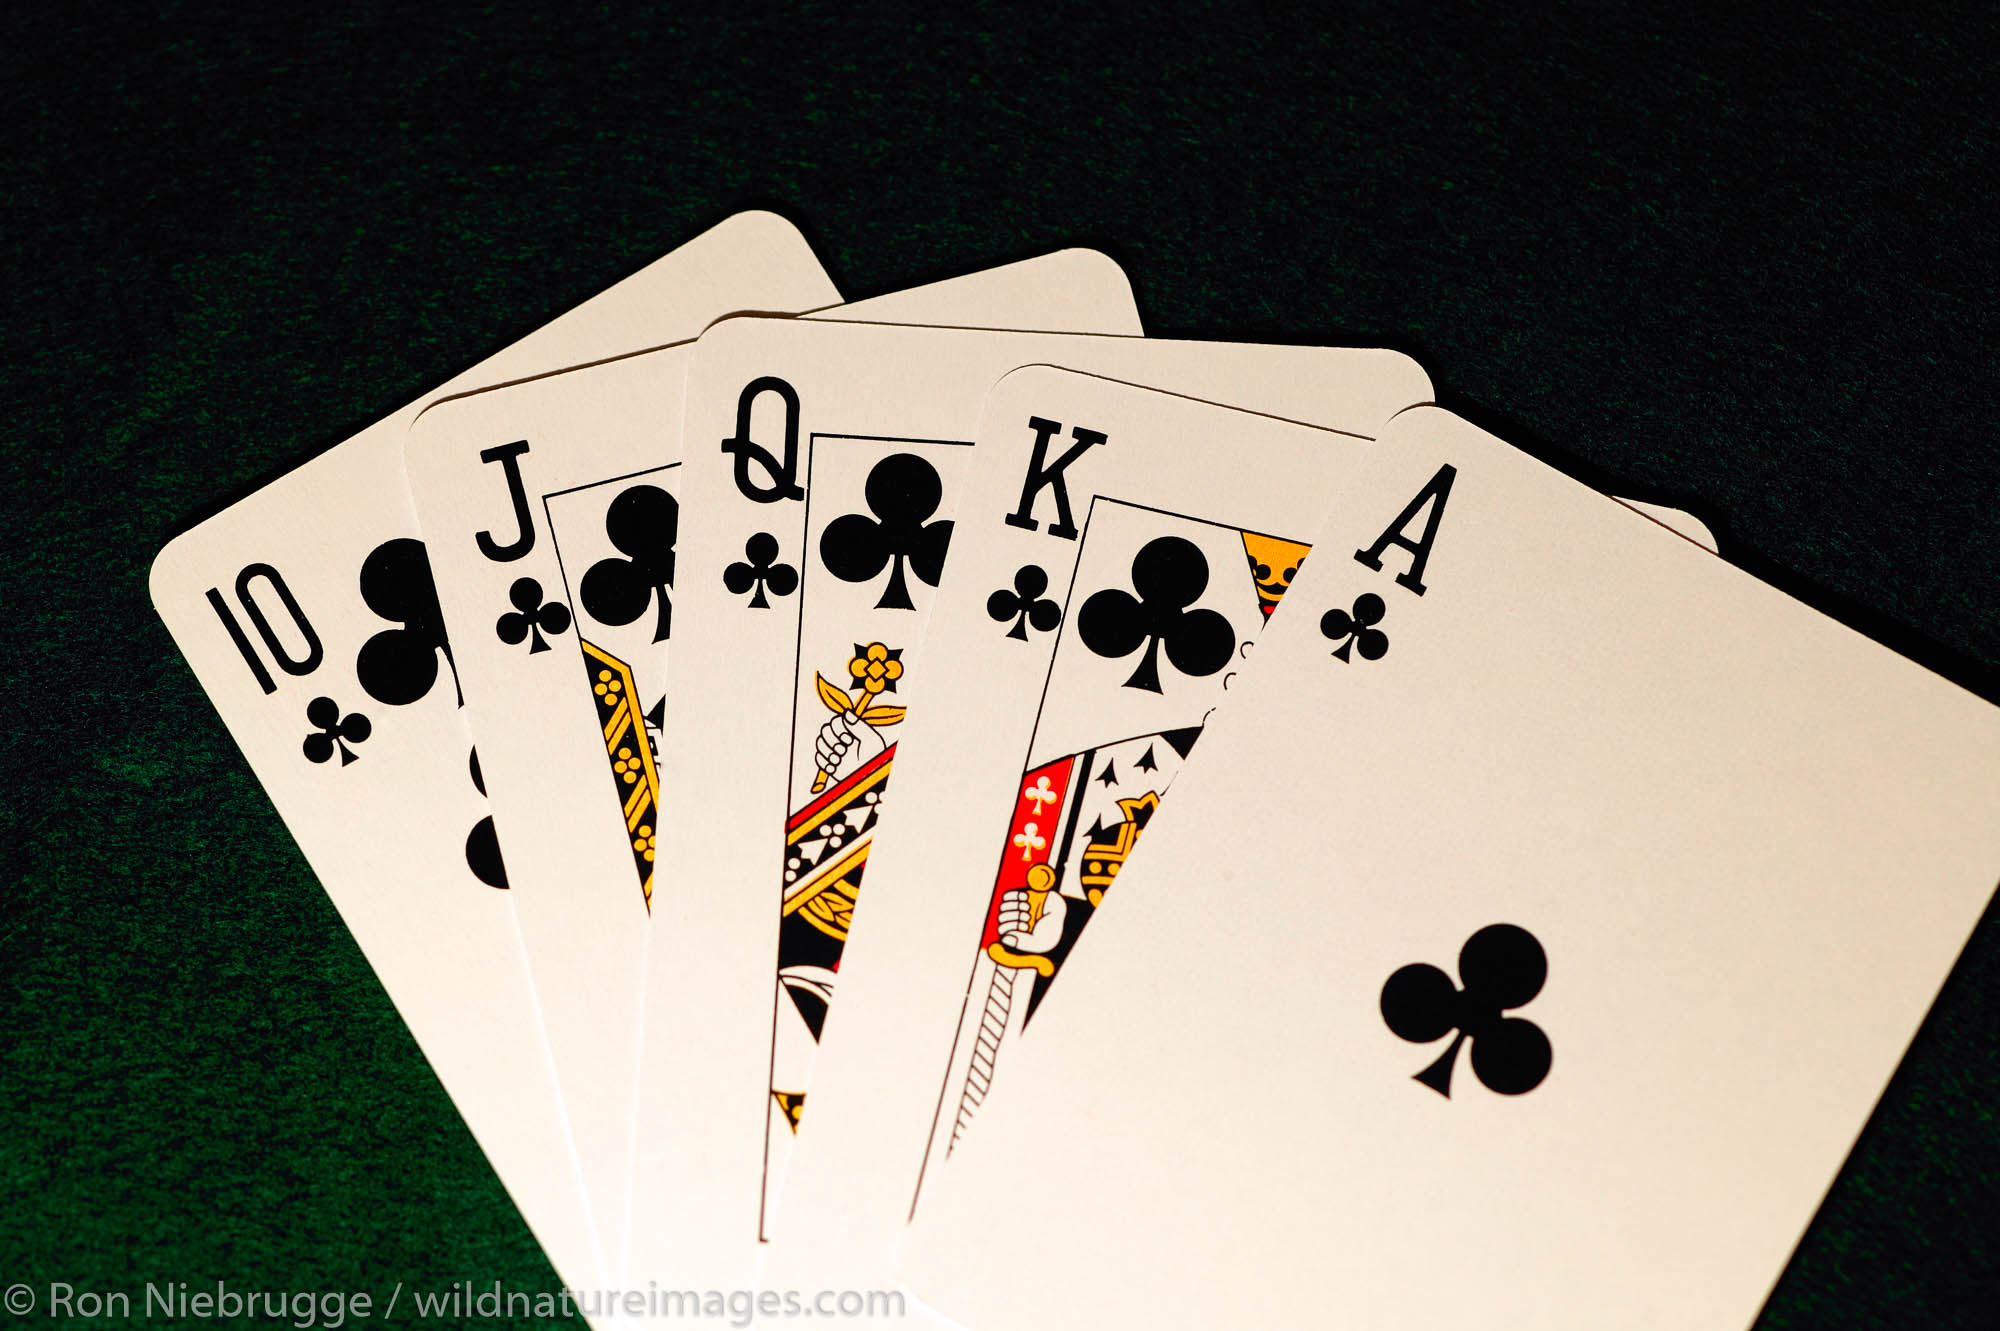 Royal flush, the best possible five card hand in poker. 